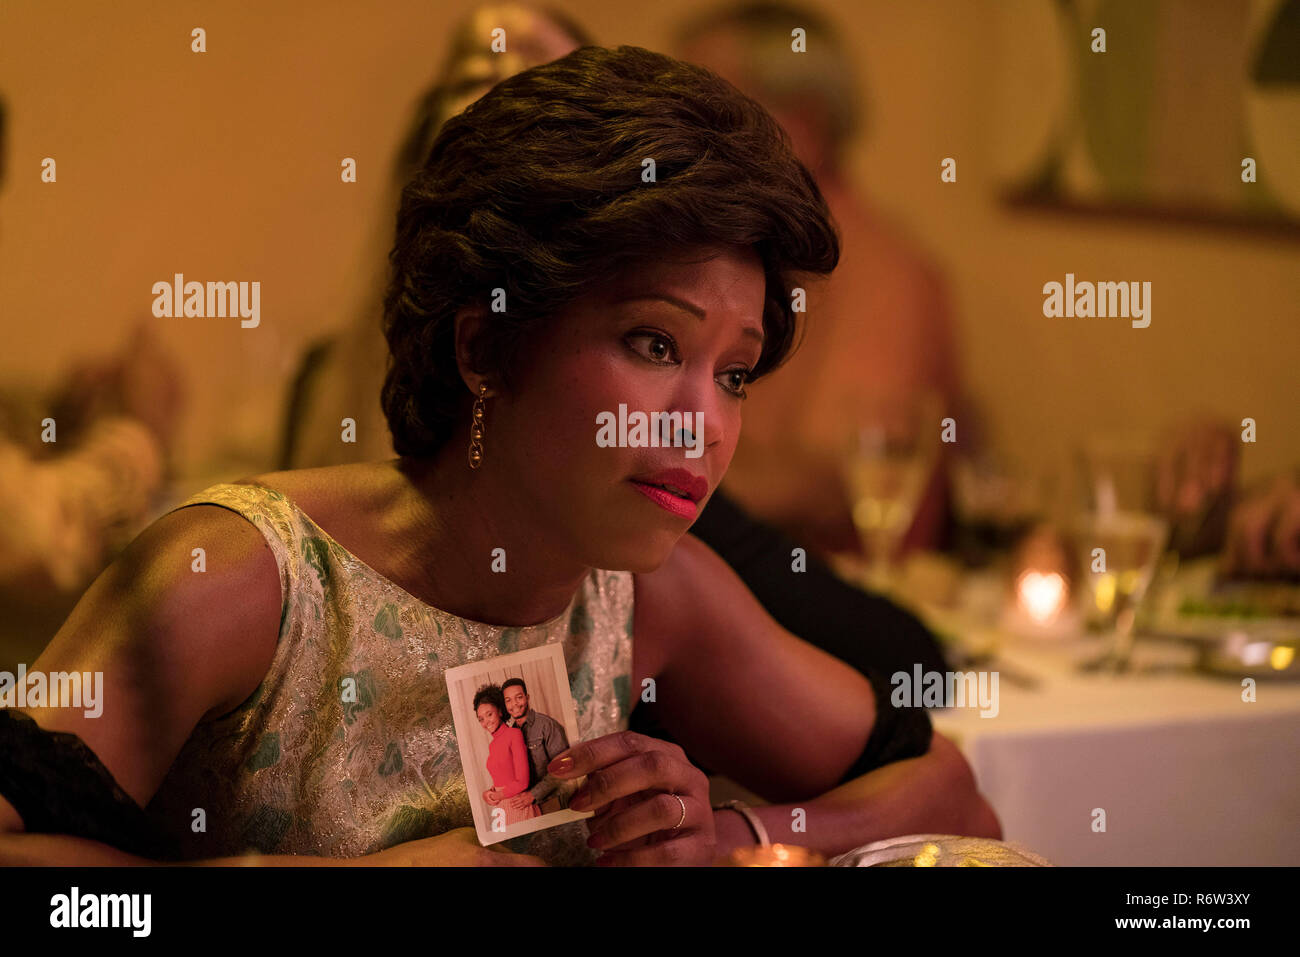 RELEASE DATE: December 25, 2018 TITLE: If Beale Street Could Talk. STUDIO: Annapurna Pictures. DIRECTOR: Barry Jenkins. PLOT: A woman in Harlem desperately scrambles to prove her fiance innocent of a crime while carrying their first child. STARRING: REGINA KING as Sharon. (Credit Image: © Annapurna Pictures/Entertainment Pictures) Stock Photo